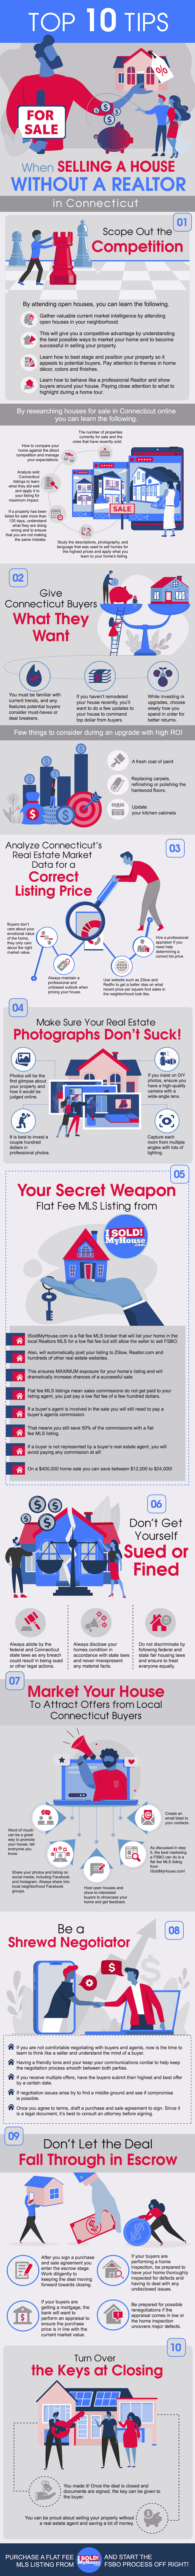 infographic of the 10 steps to sell a house in connecticut without an agent